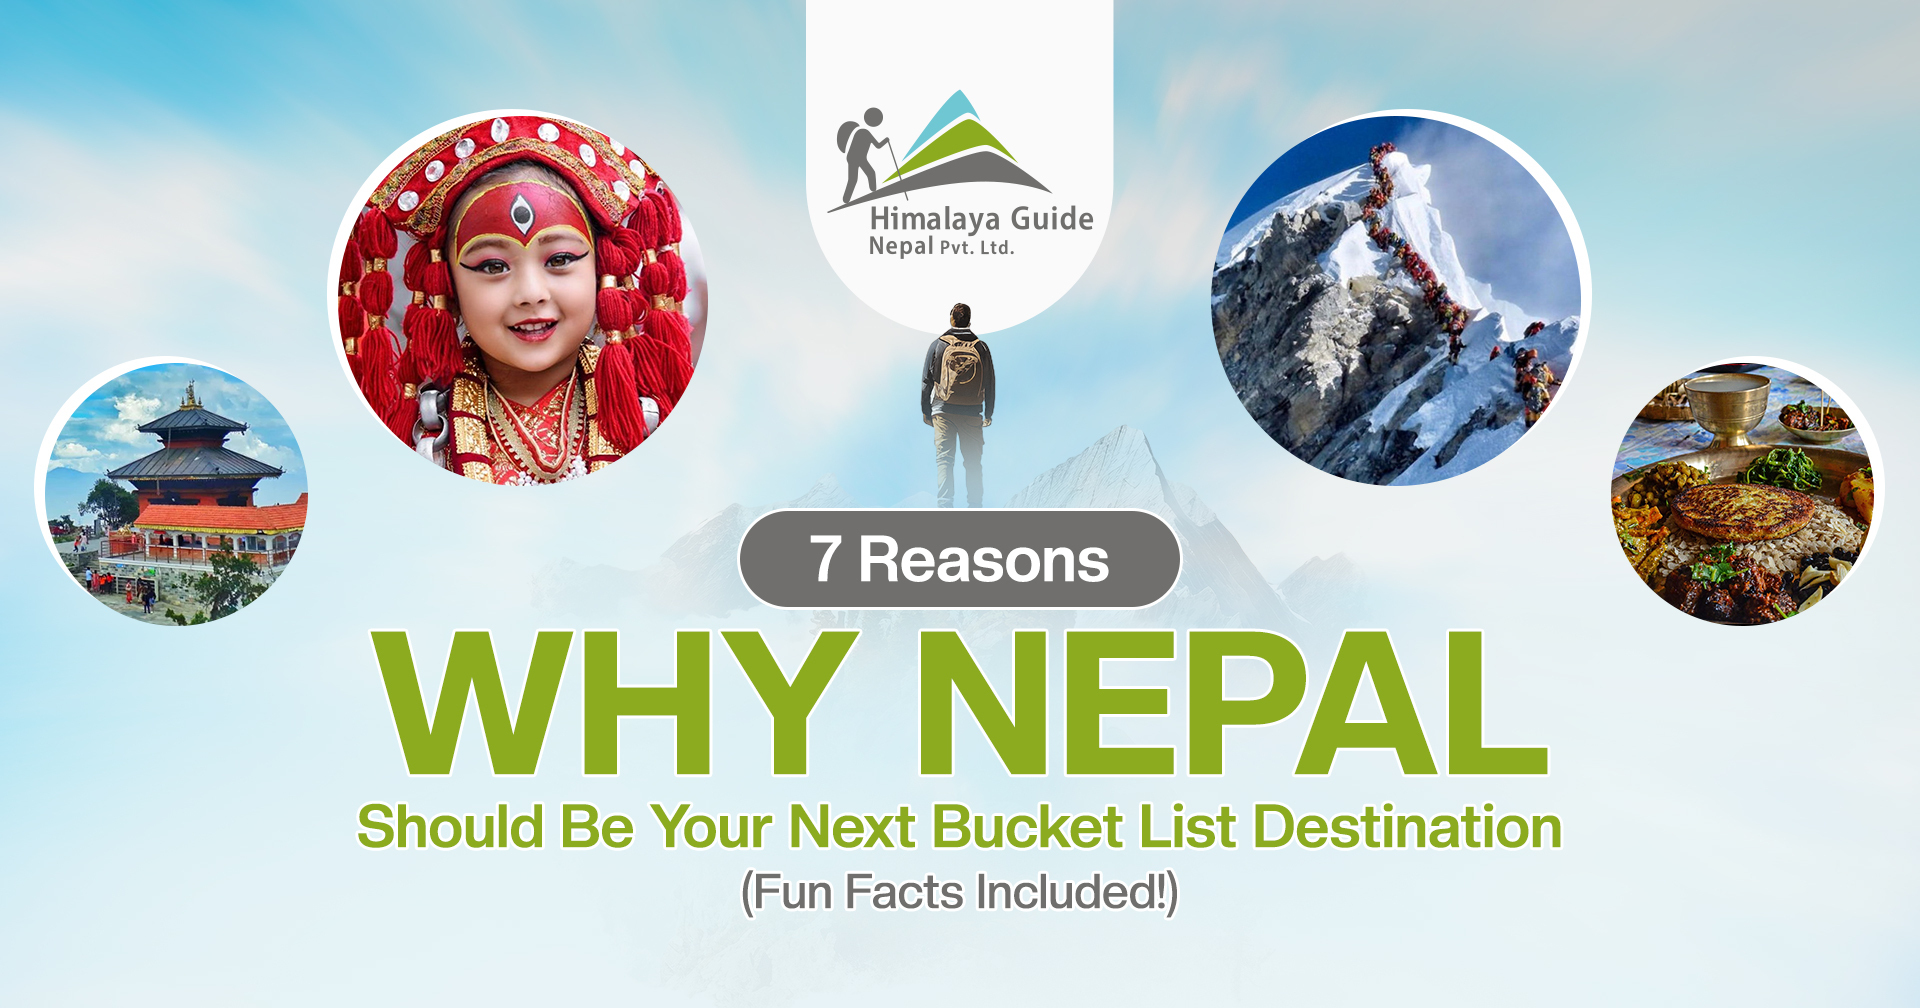 7 Reasons Why Nepal Should Be Your Next Bucket List Destination (Fun Facts Included!)